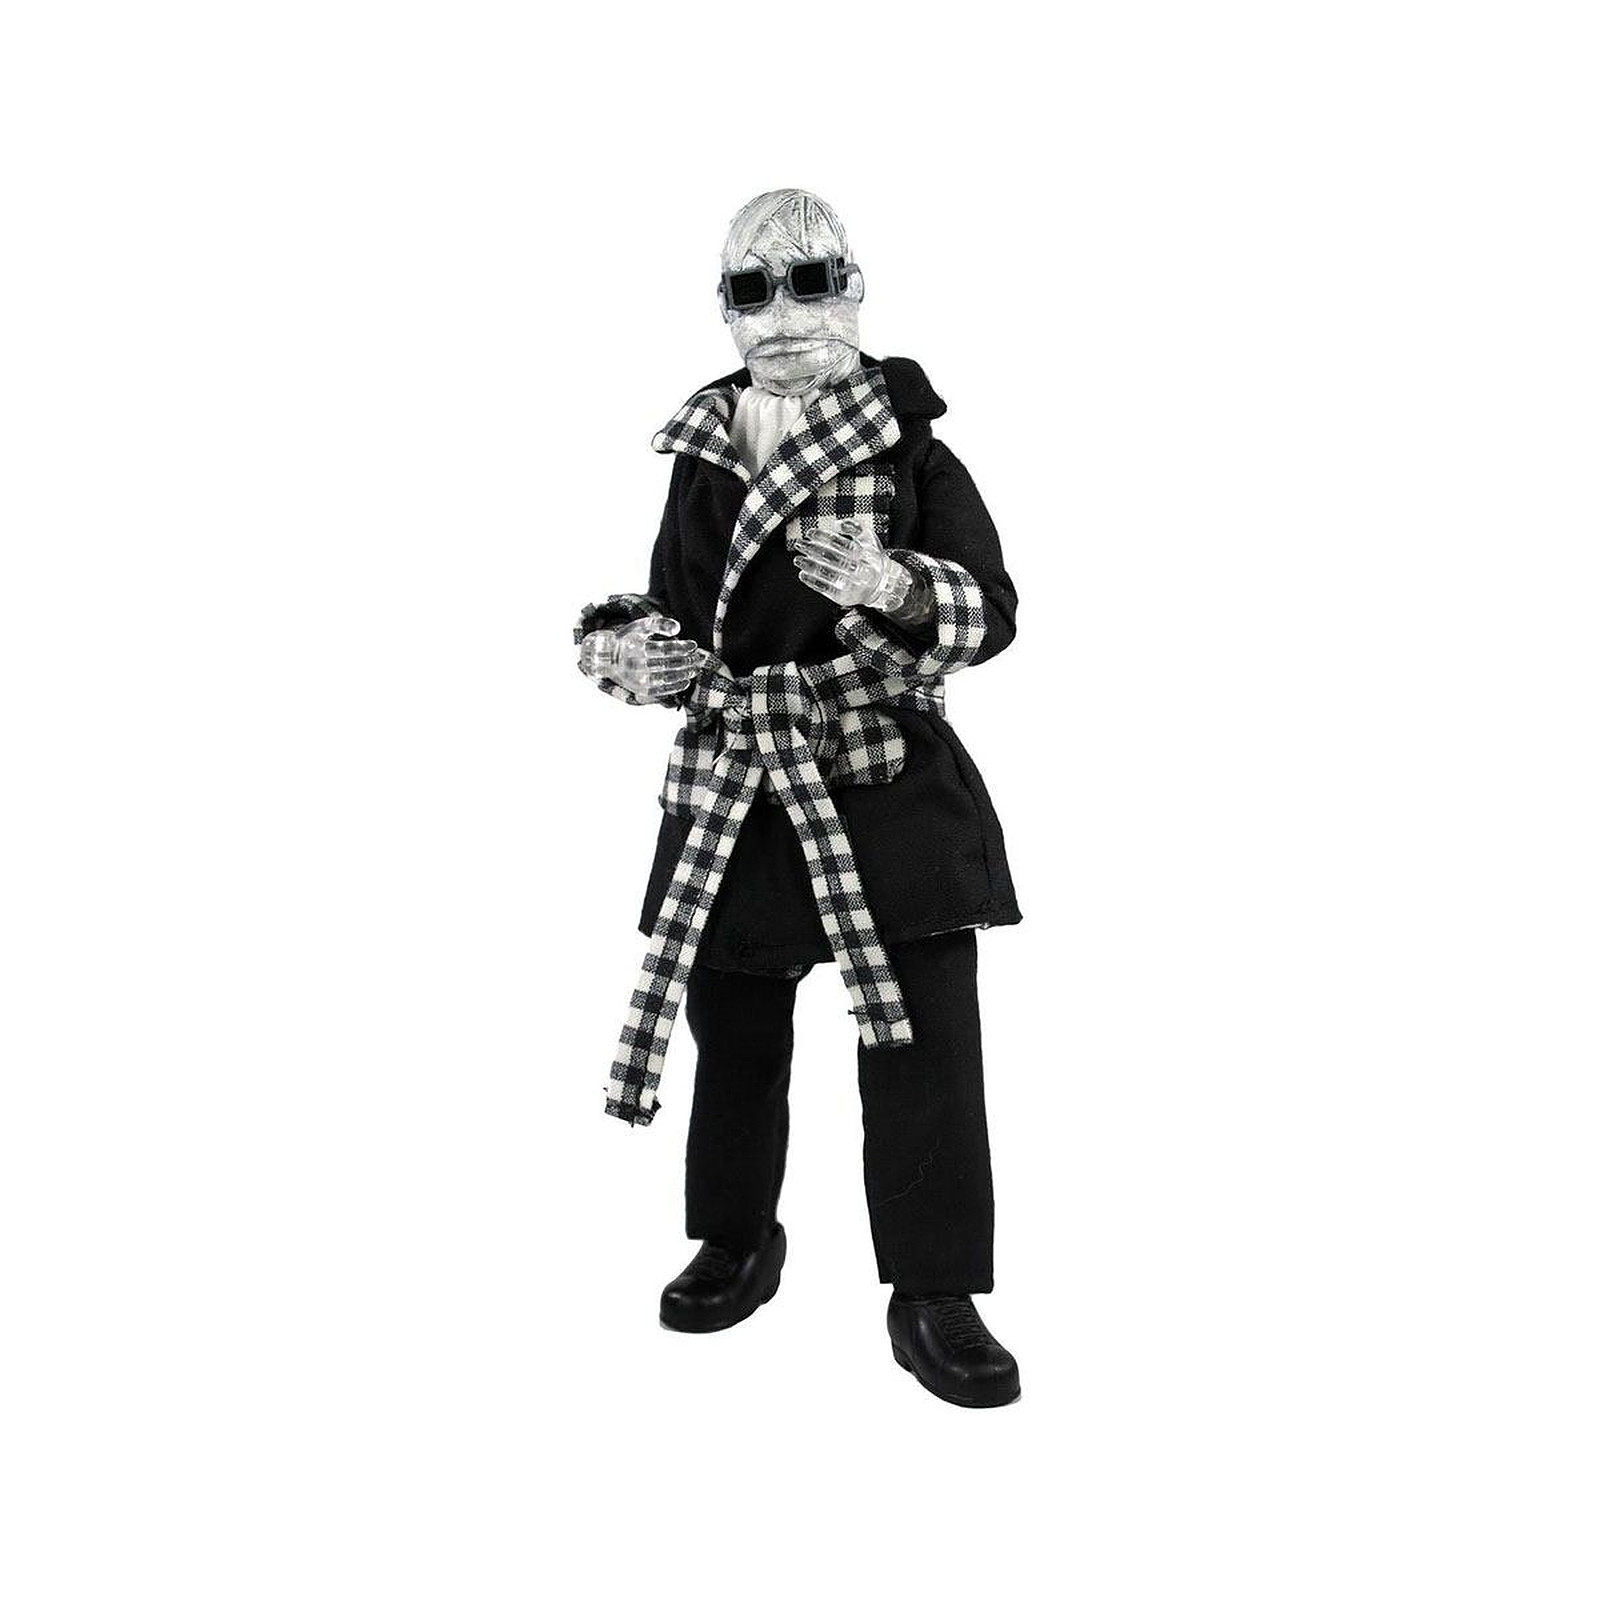 Universal Monsters - Figurine L'Homme invisible 20 cm - Figurines Mego